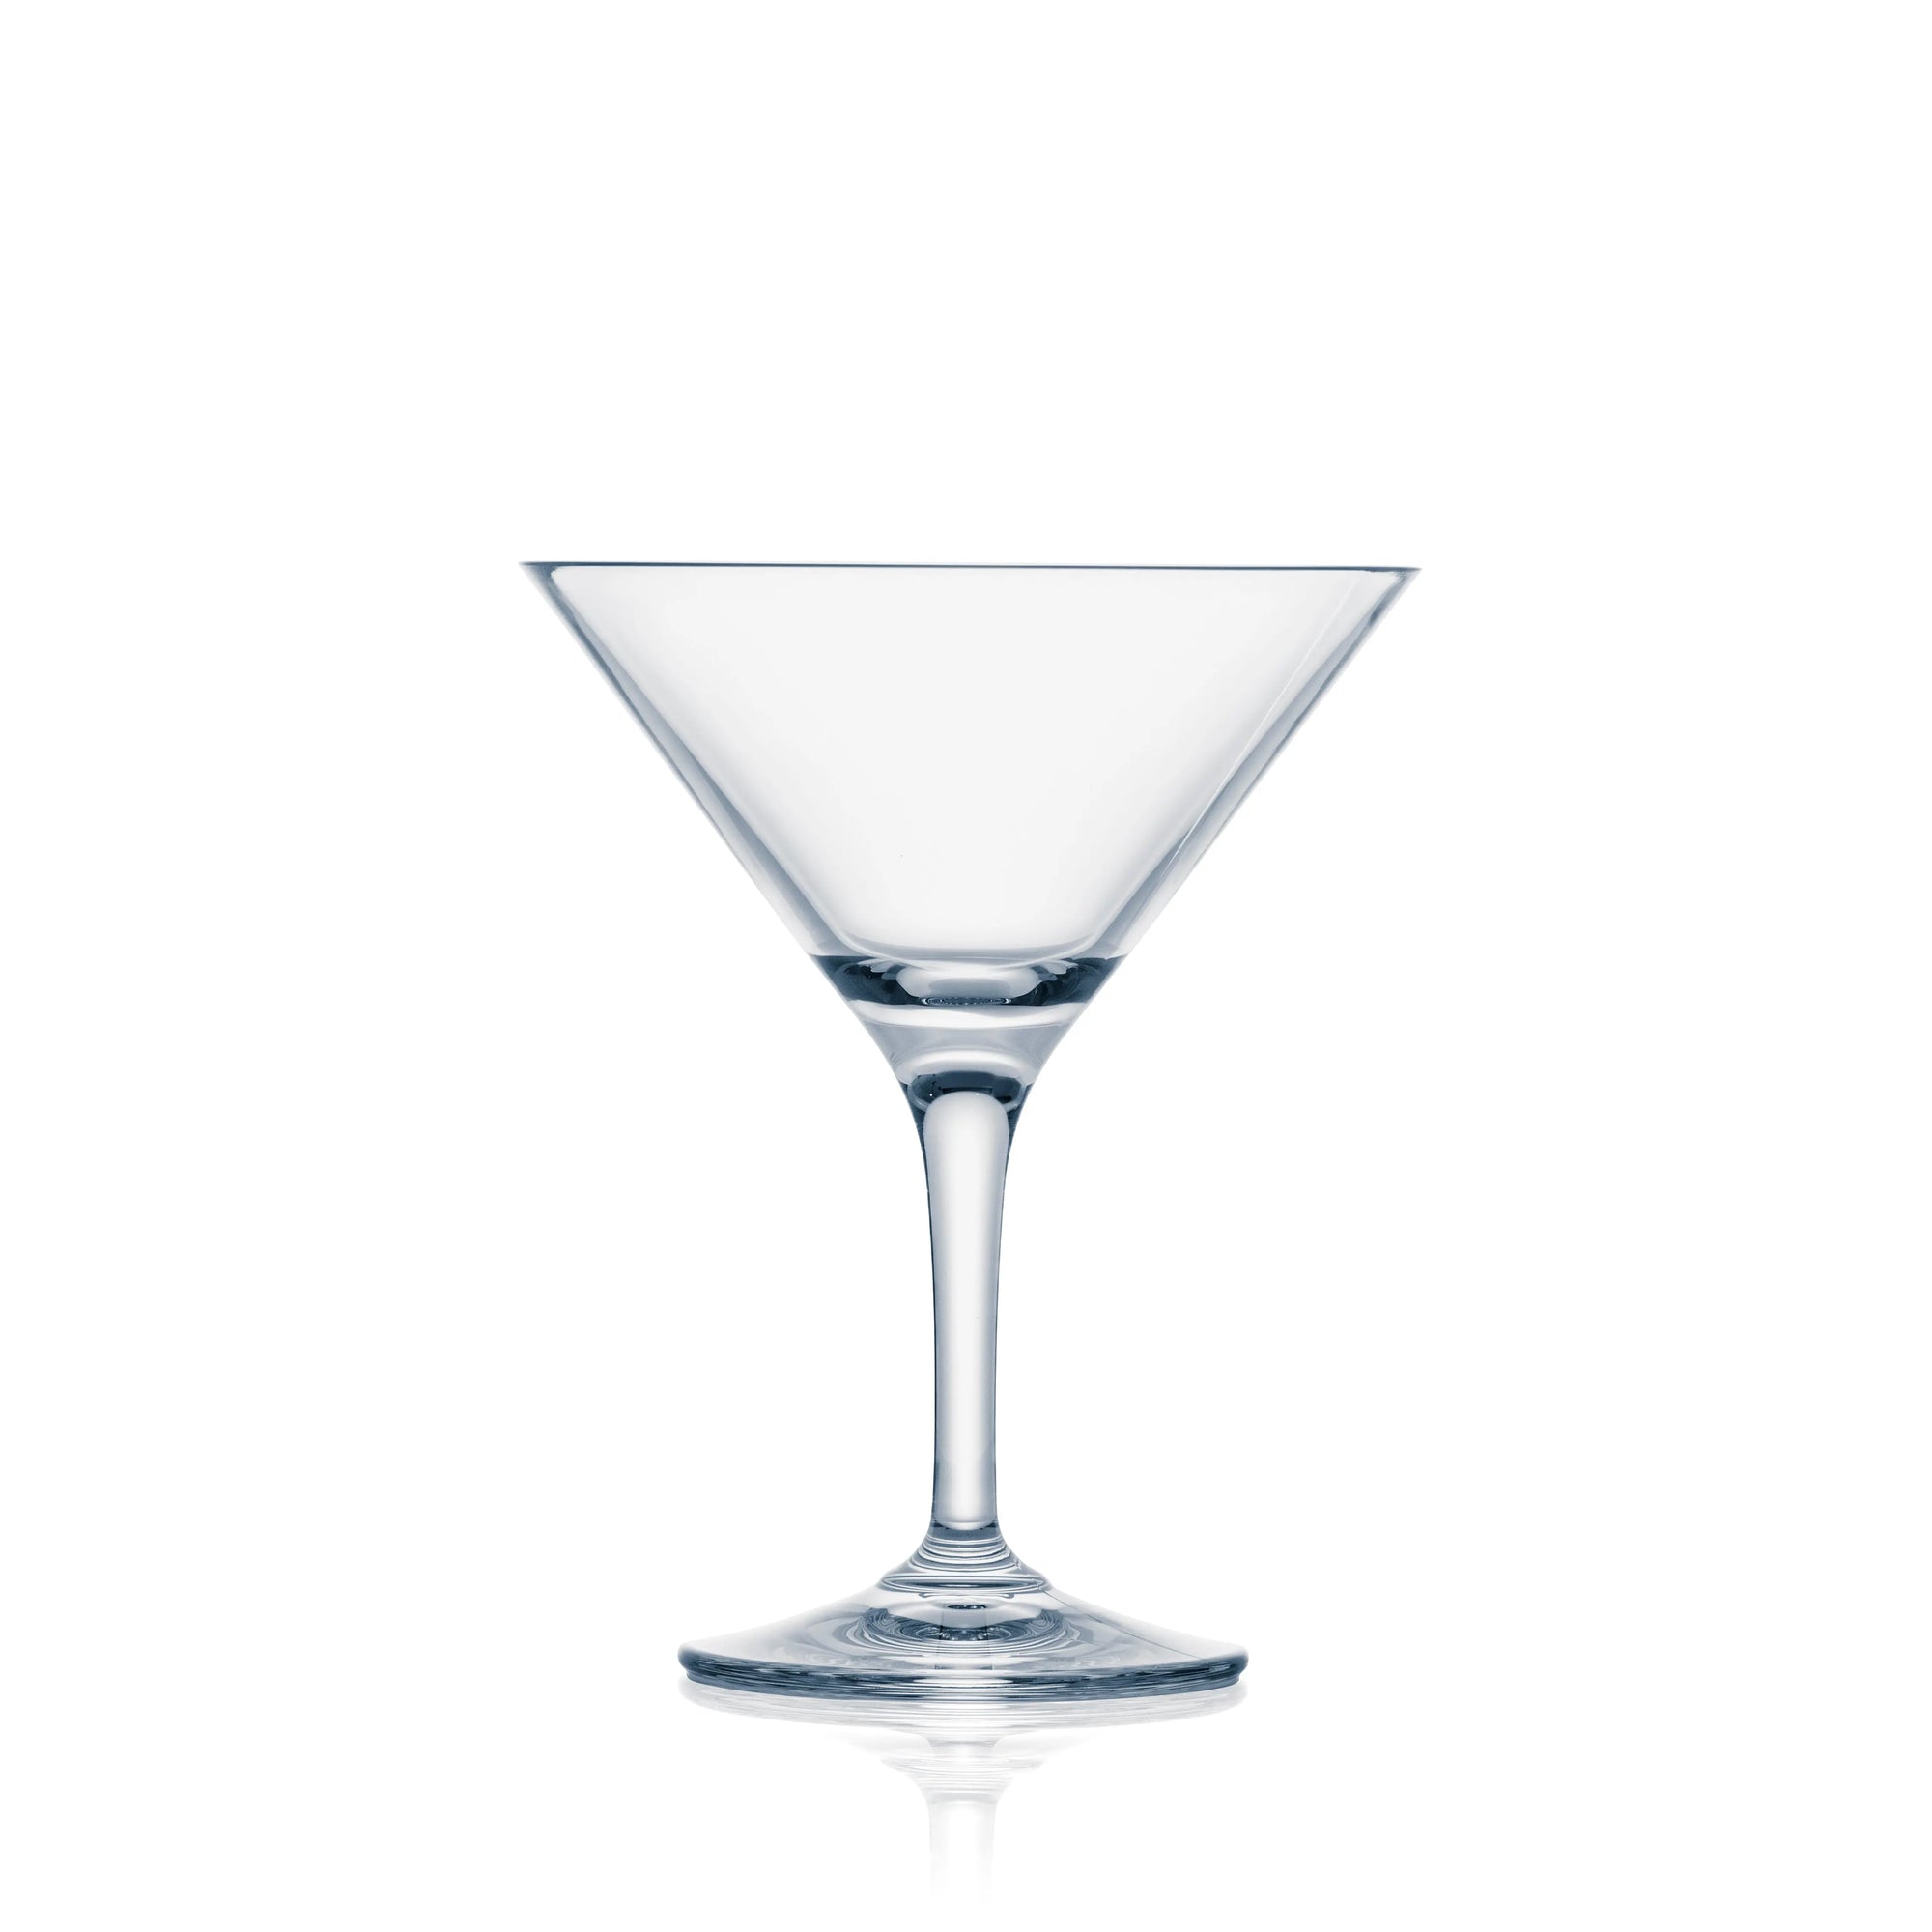 Strahl Design+Contemporary Martini groot (355ml) - N40150 Strahl